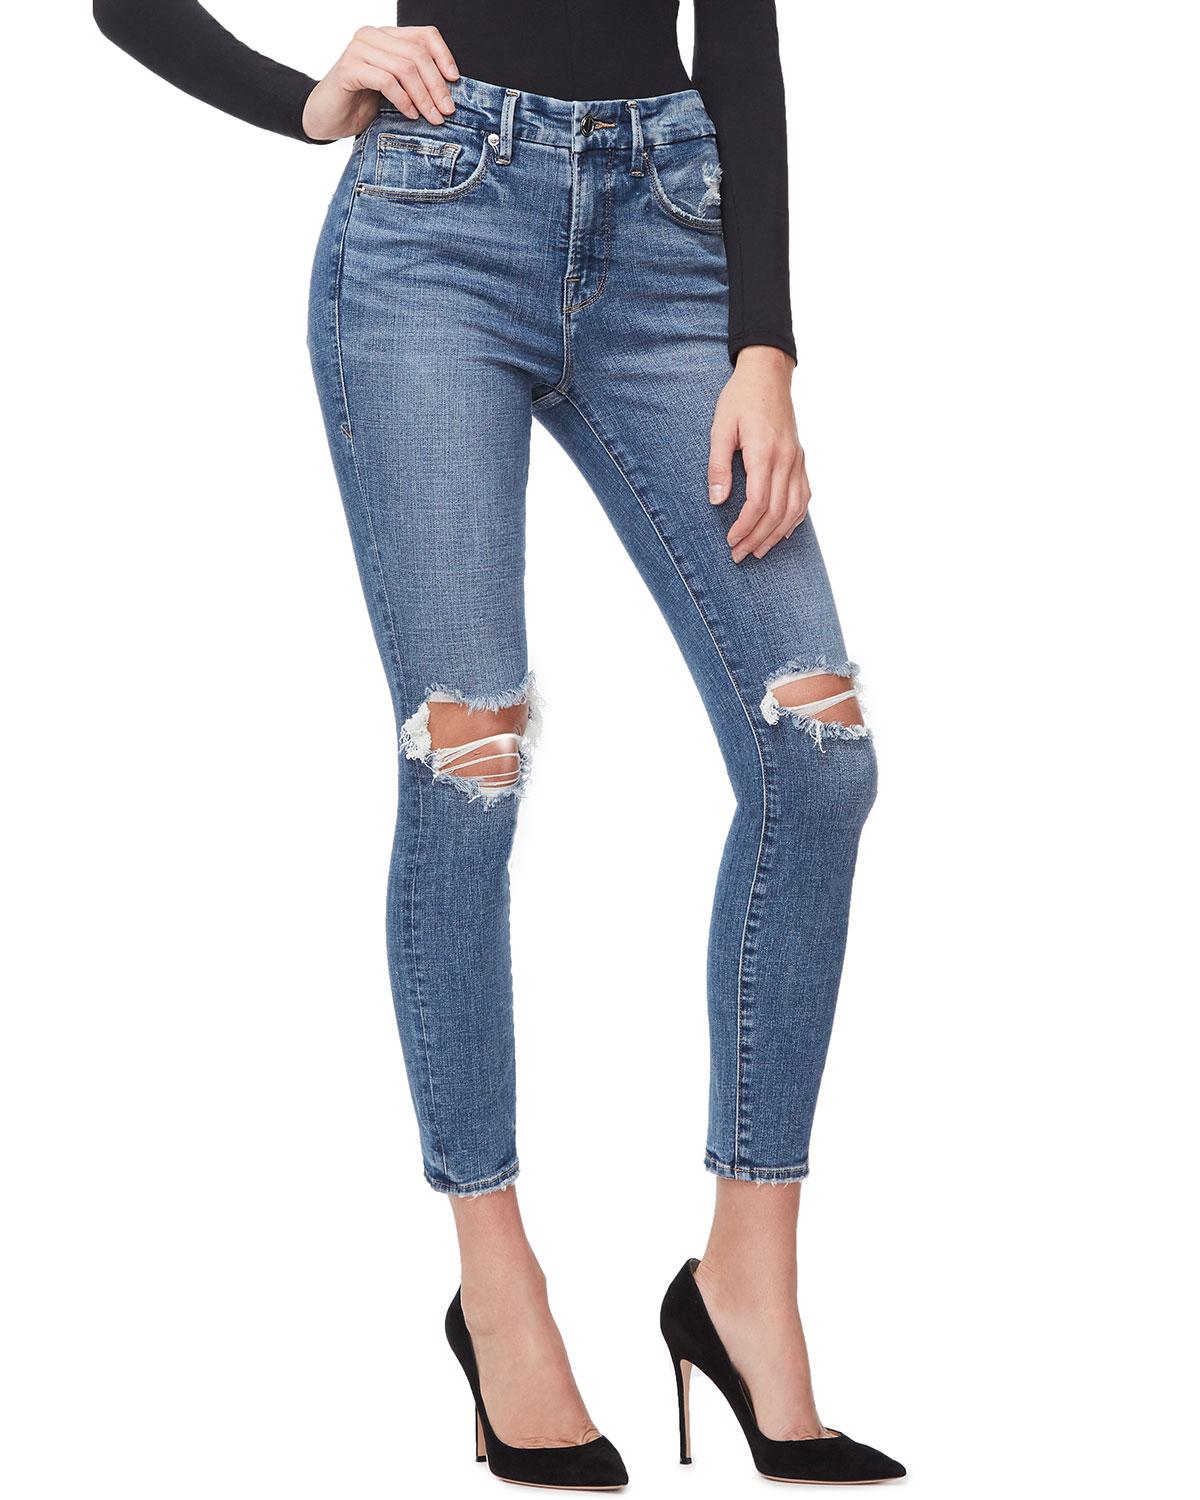 Lyst - GOOD AMERICAN Good Legs Crop Knee-rip Jeans - Inclusive Sizing ...